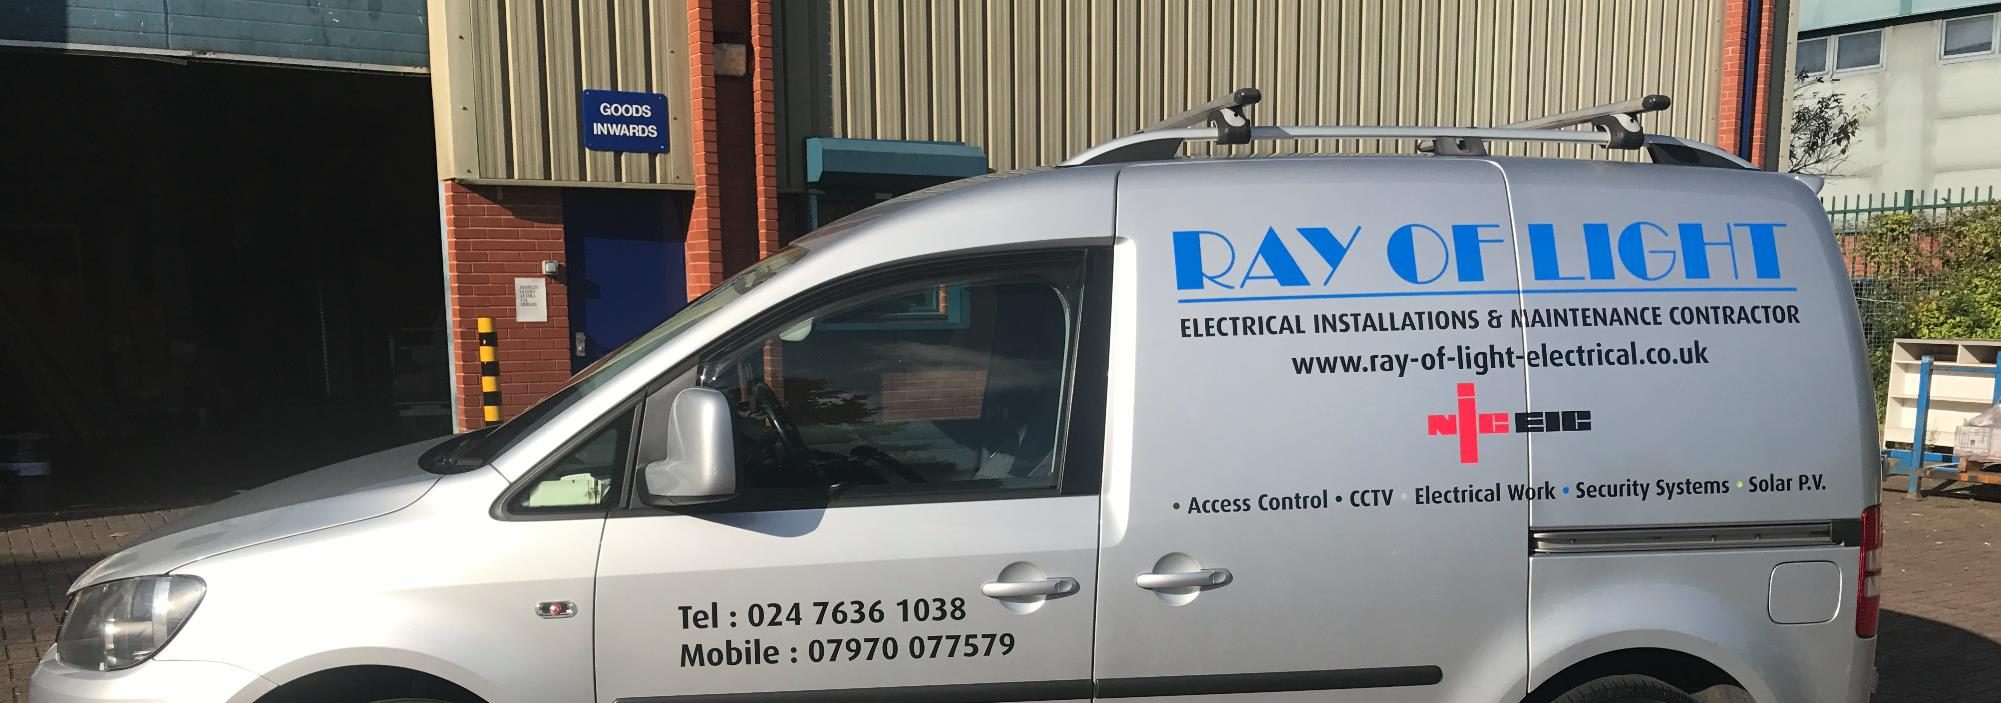 Ray Of Light Electrical Services Electricians in Coventry